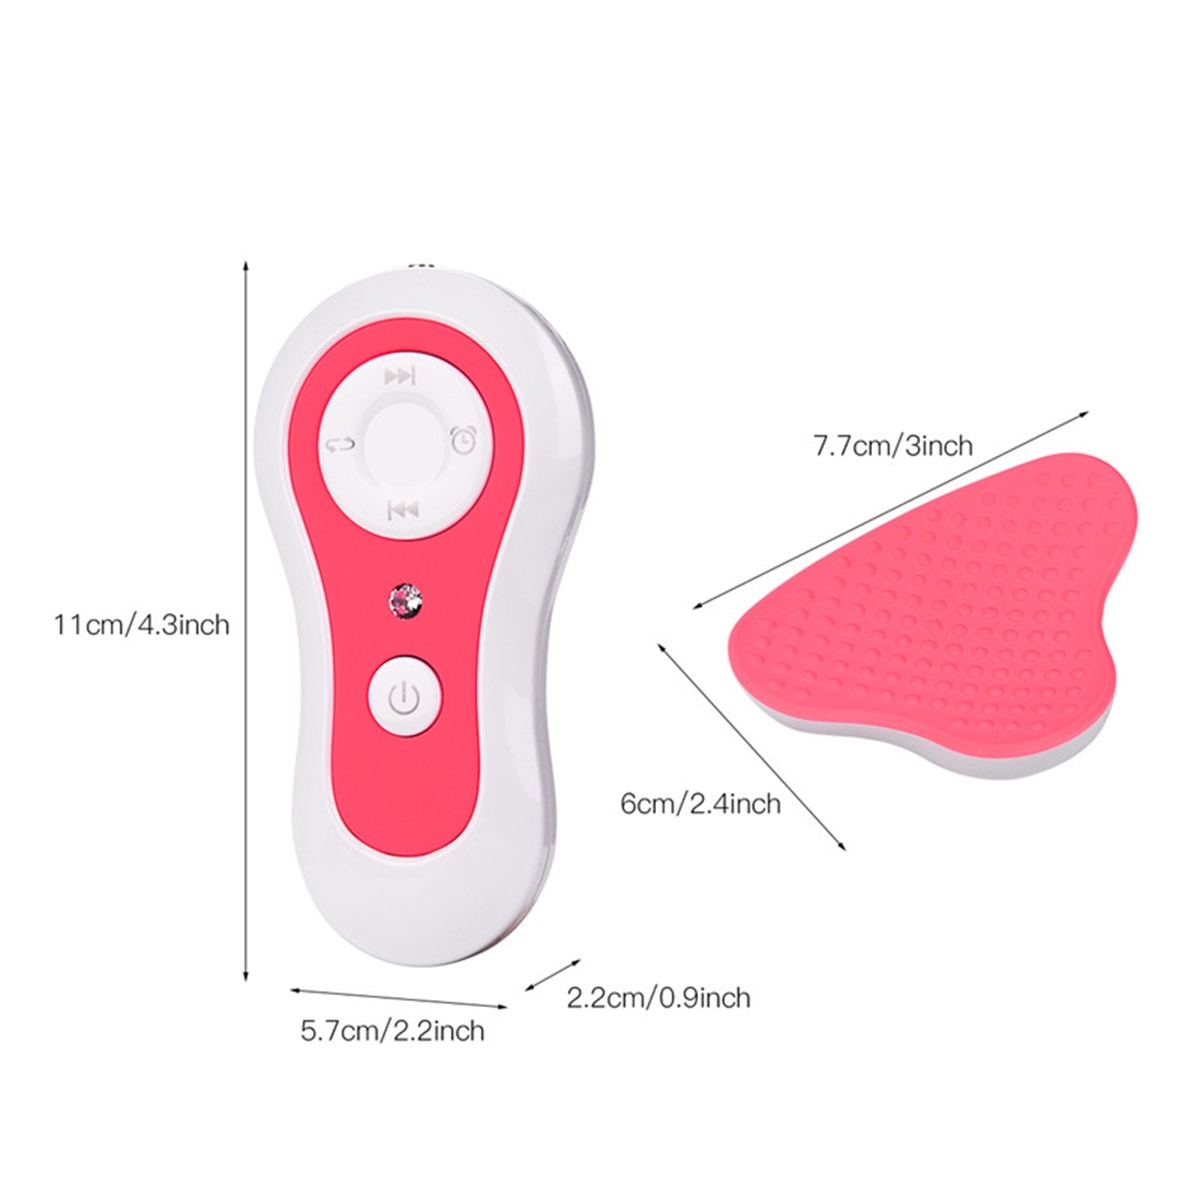 USB Electric Breast Massage Instrument Breast Massager Enlargement Acupressure Chest Massage Anti-Breast Sagging Chest Care Tool